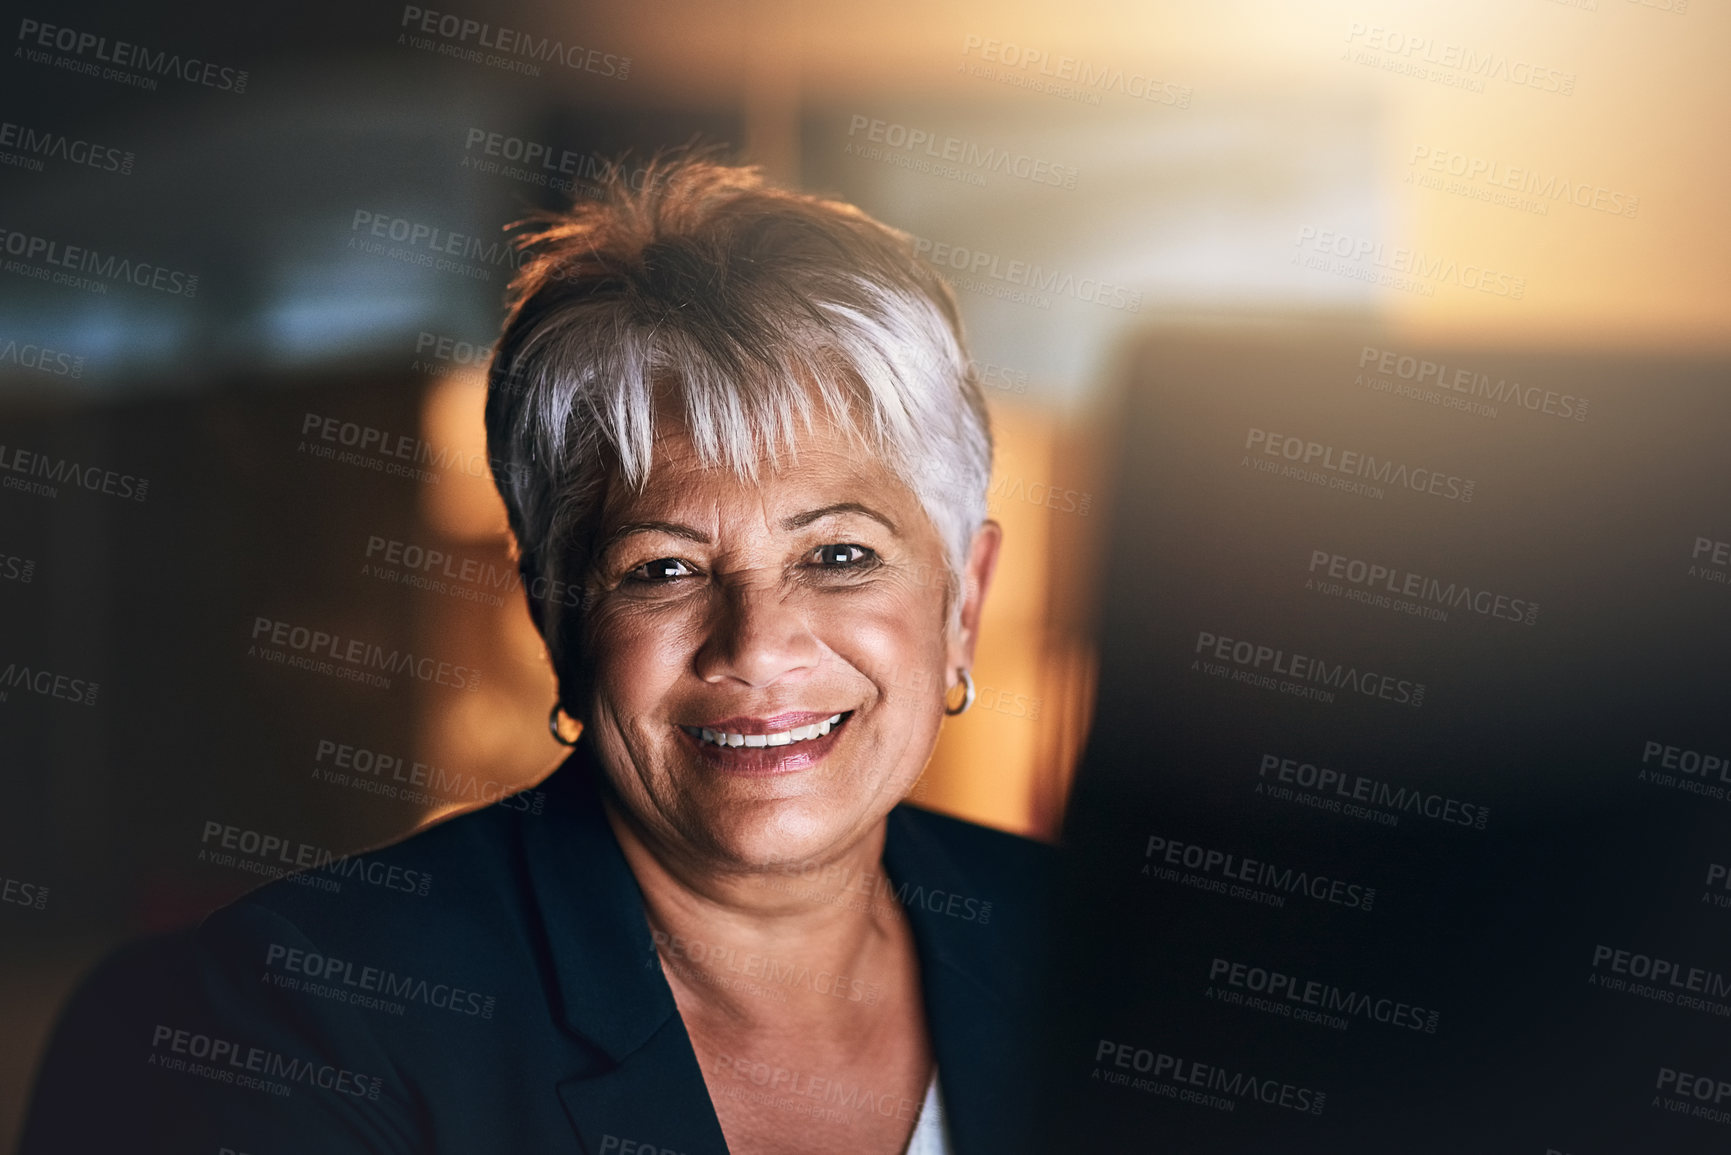 Buy stock photo Shot of a mature businesswoman using a computer during a late night at work